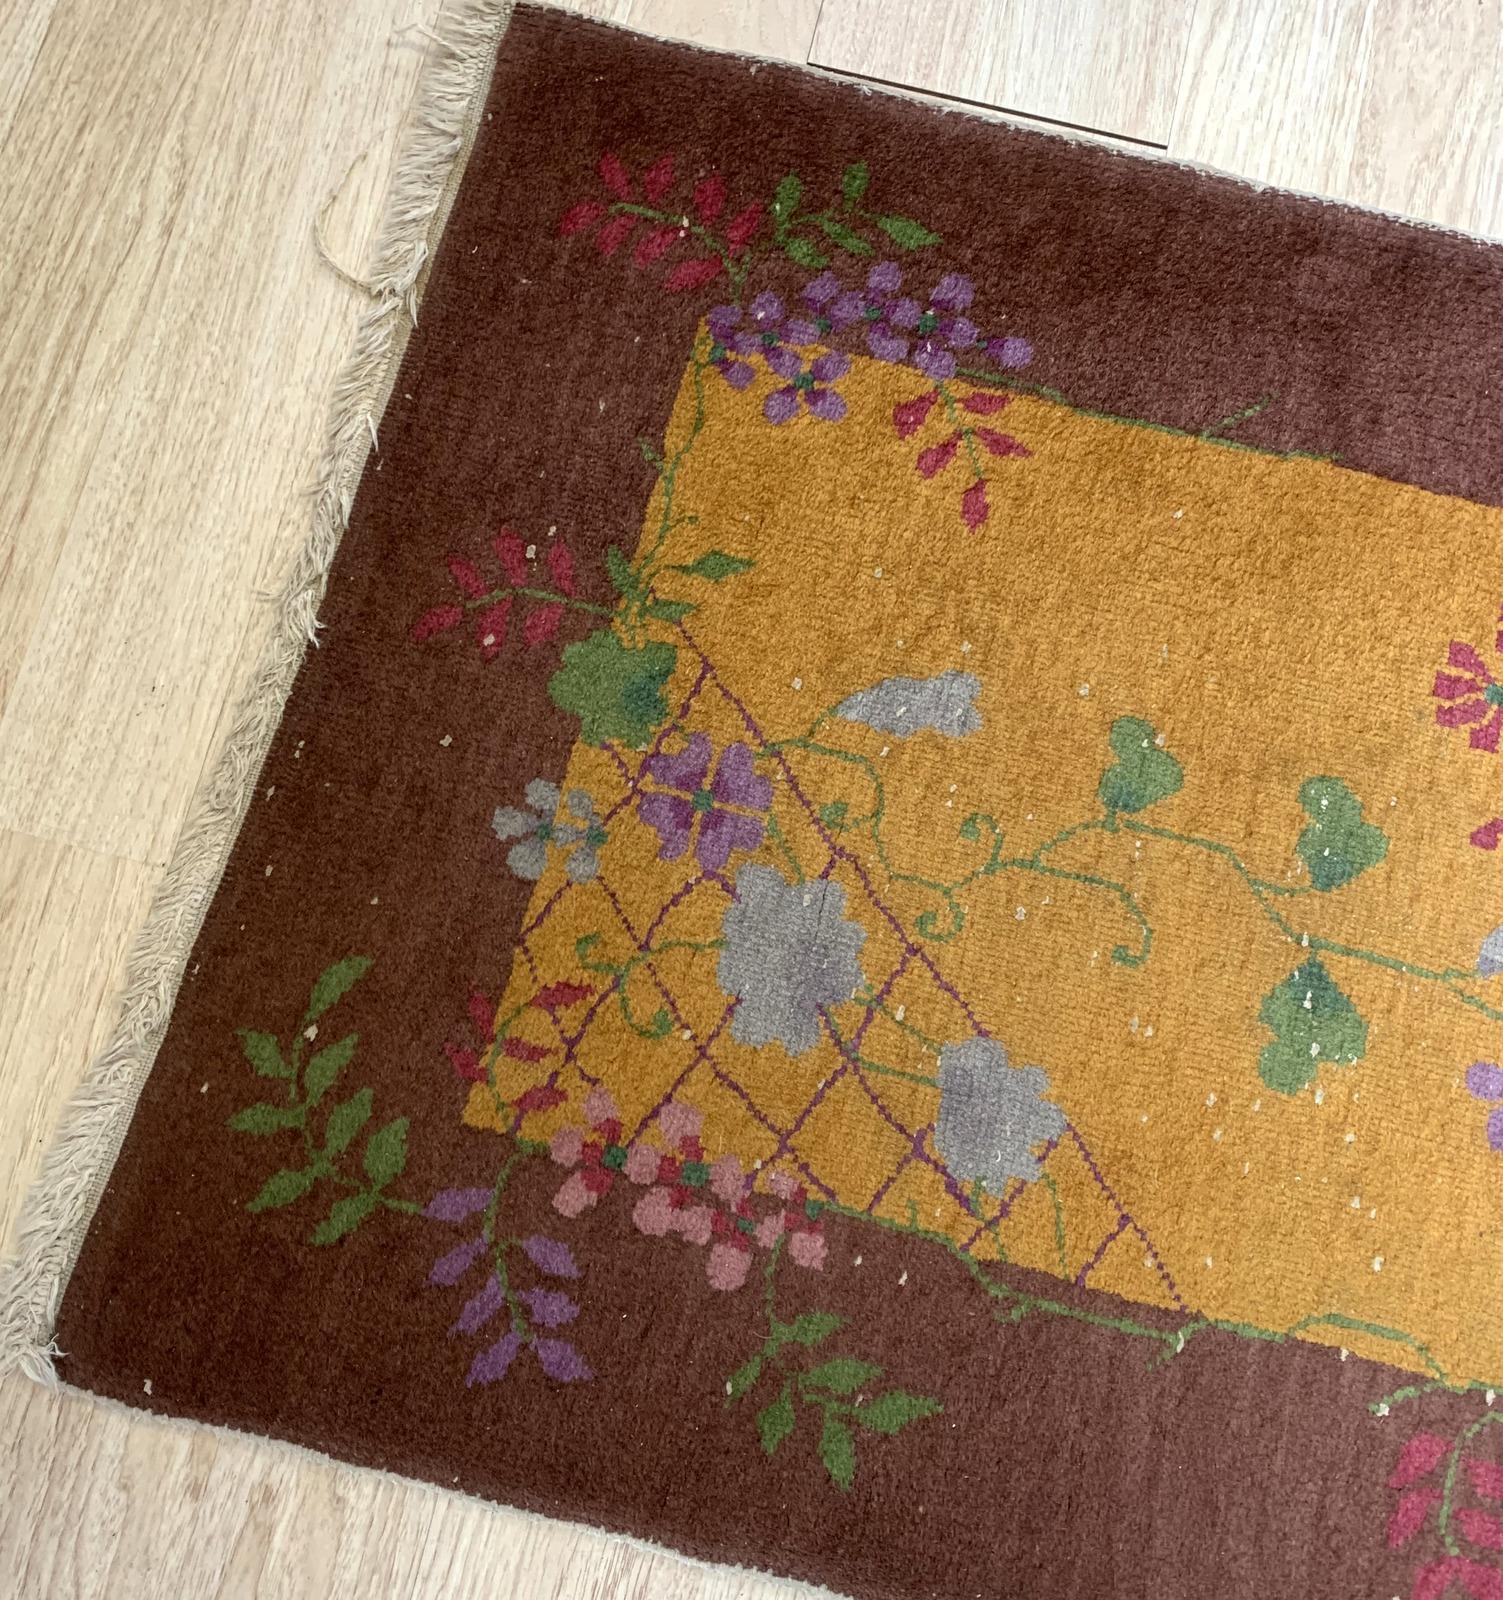 Handmade antique Art Deco Chinese rug in original condition, it has some low pile. The rug is from the beginning of 20th century. 

-condition: original, low pile,

-circa: 1920s,

-size: 2.10' x 5.2' (90cm x 158cm)?,

-material: